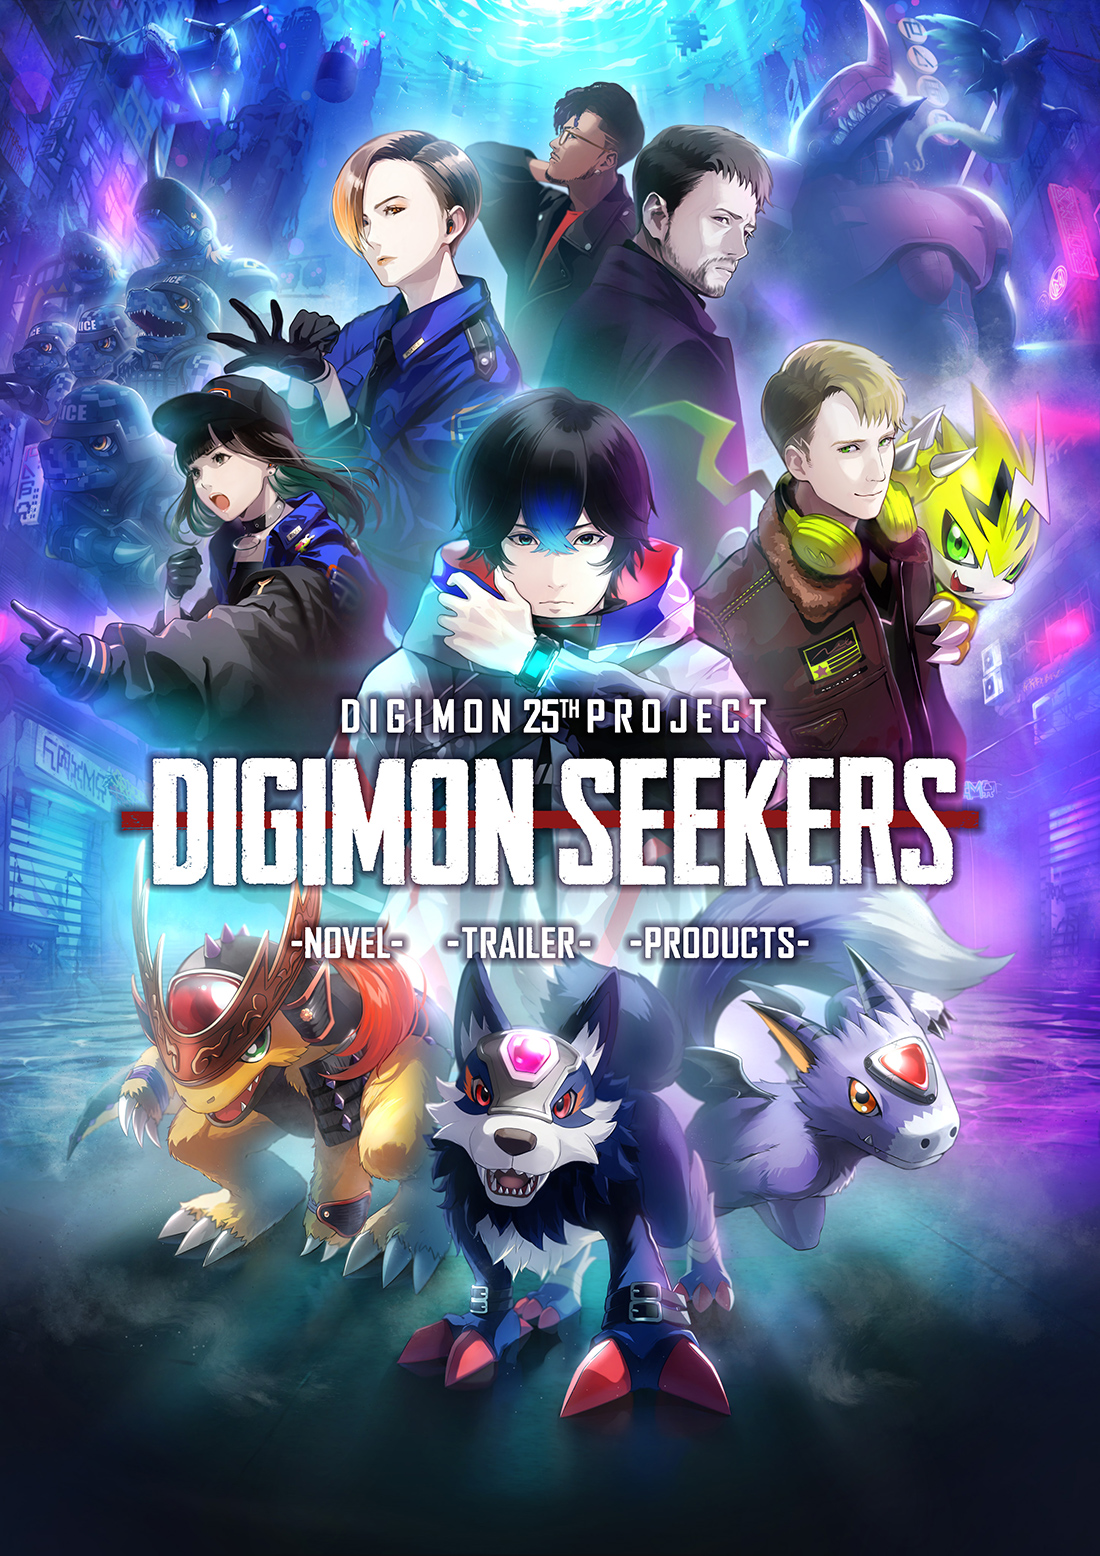 DIGIMON 25th PROJECT DIGIMONSEEKERS -NOVEL- -TRAILER- -PRODUCTS-